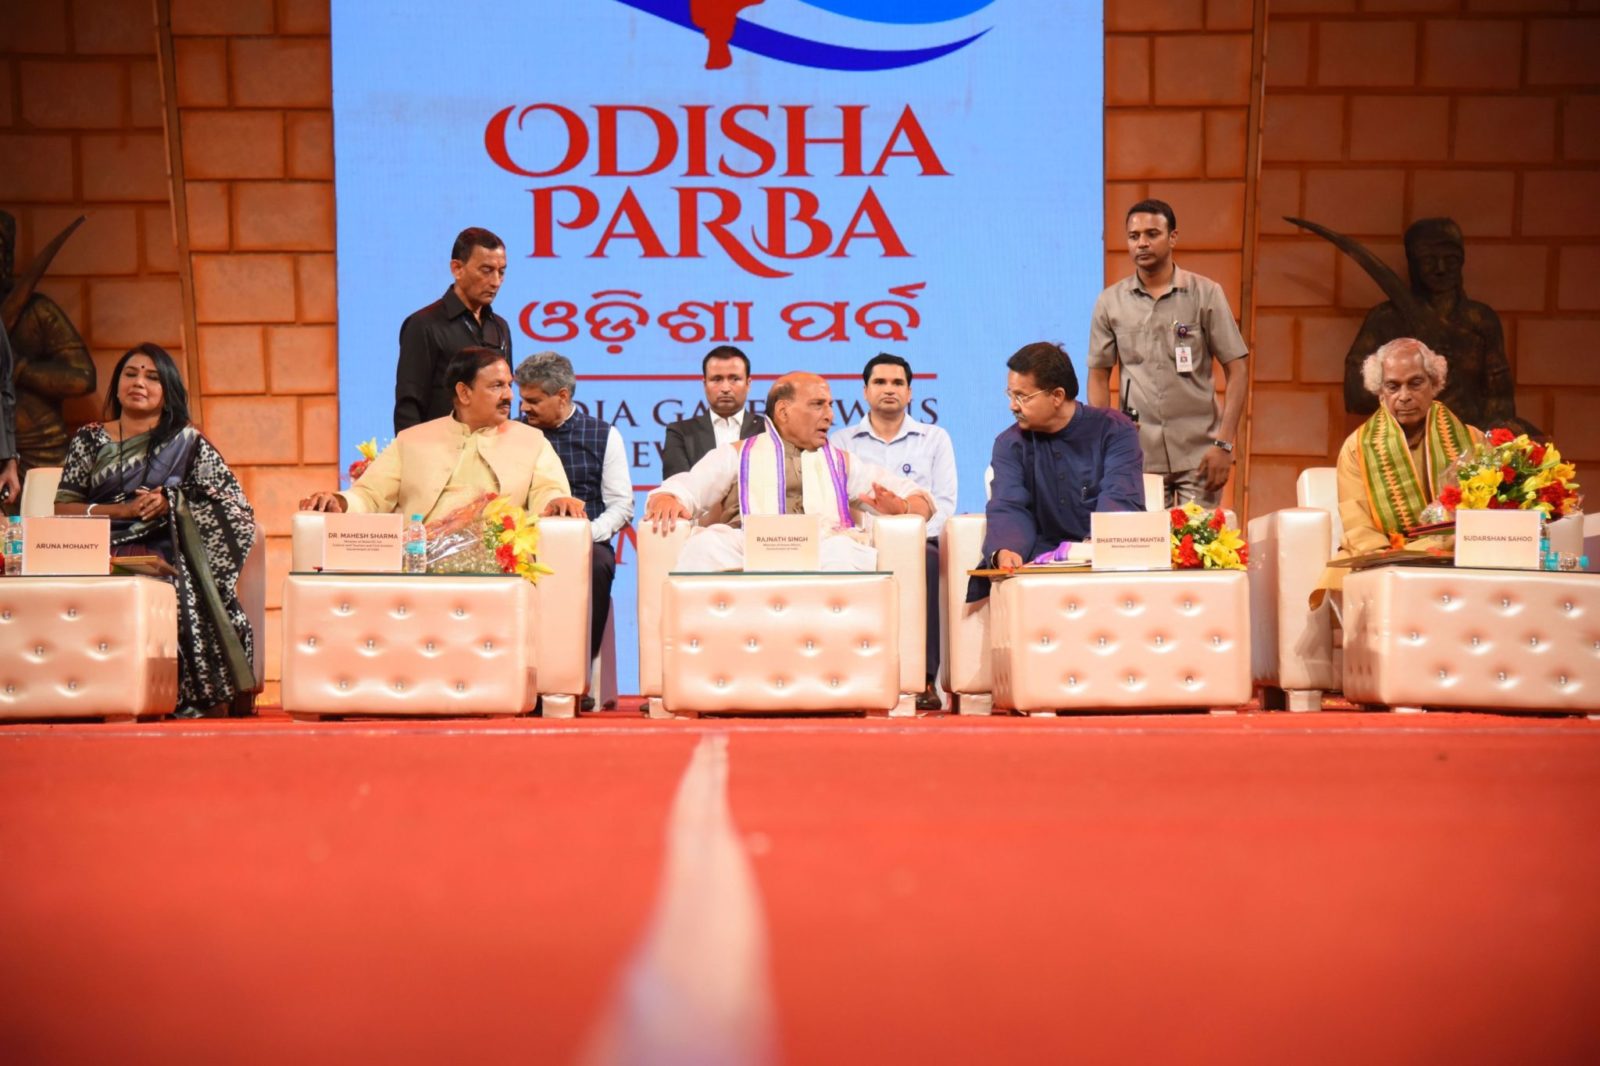 Delhi celebrated the second edition of ‘Odisha Parba 2018’ with much pomp and vigor at India Gate decoding=